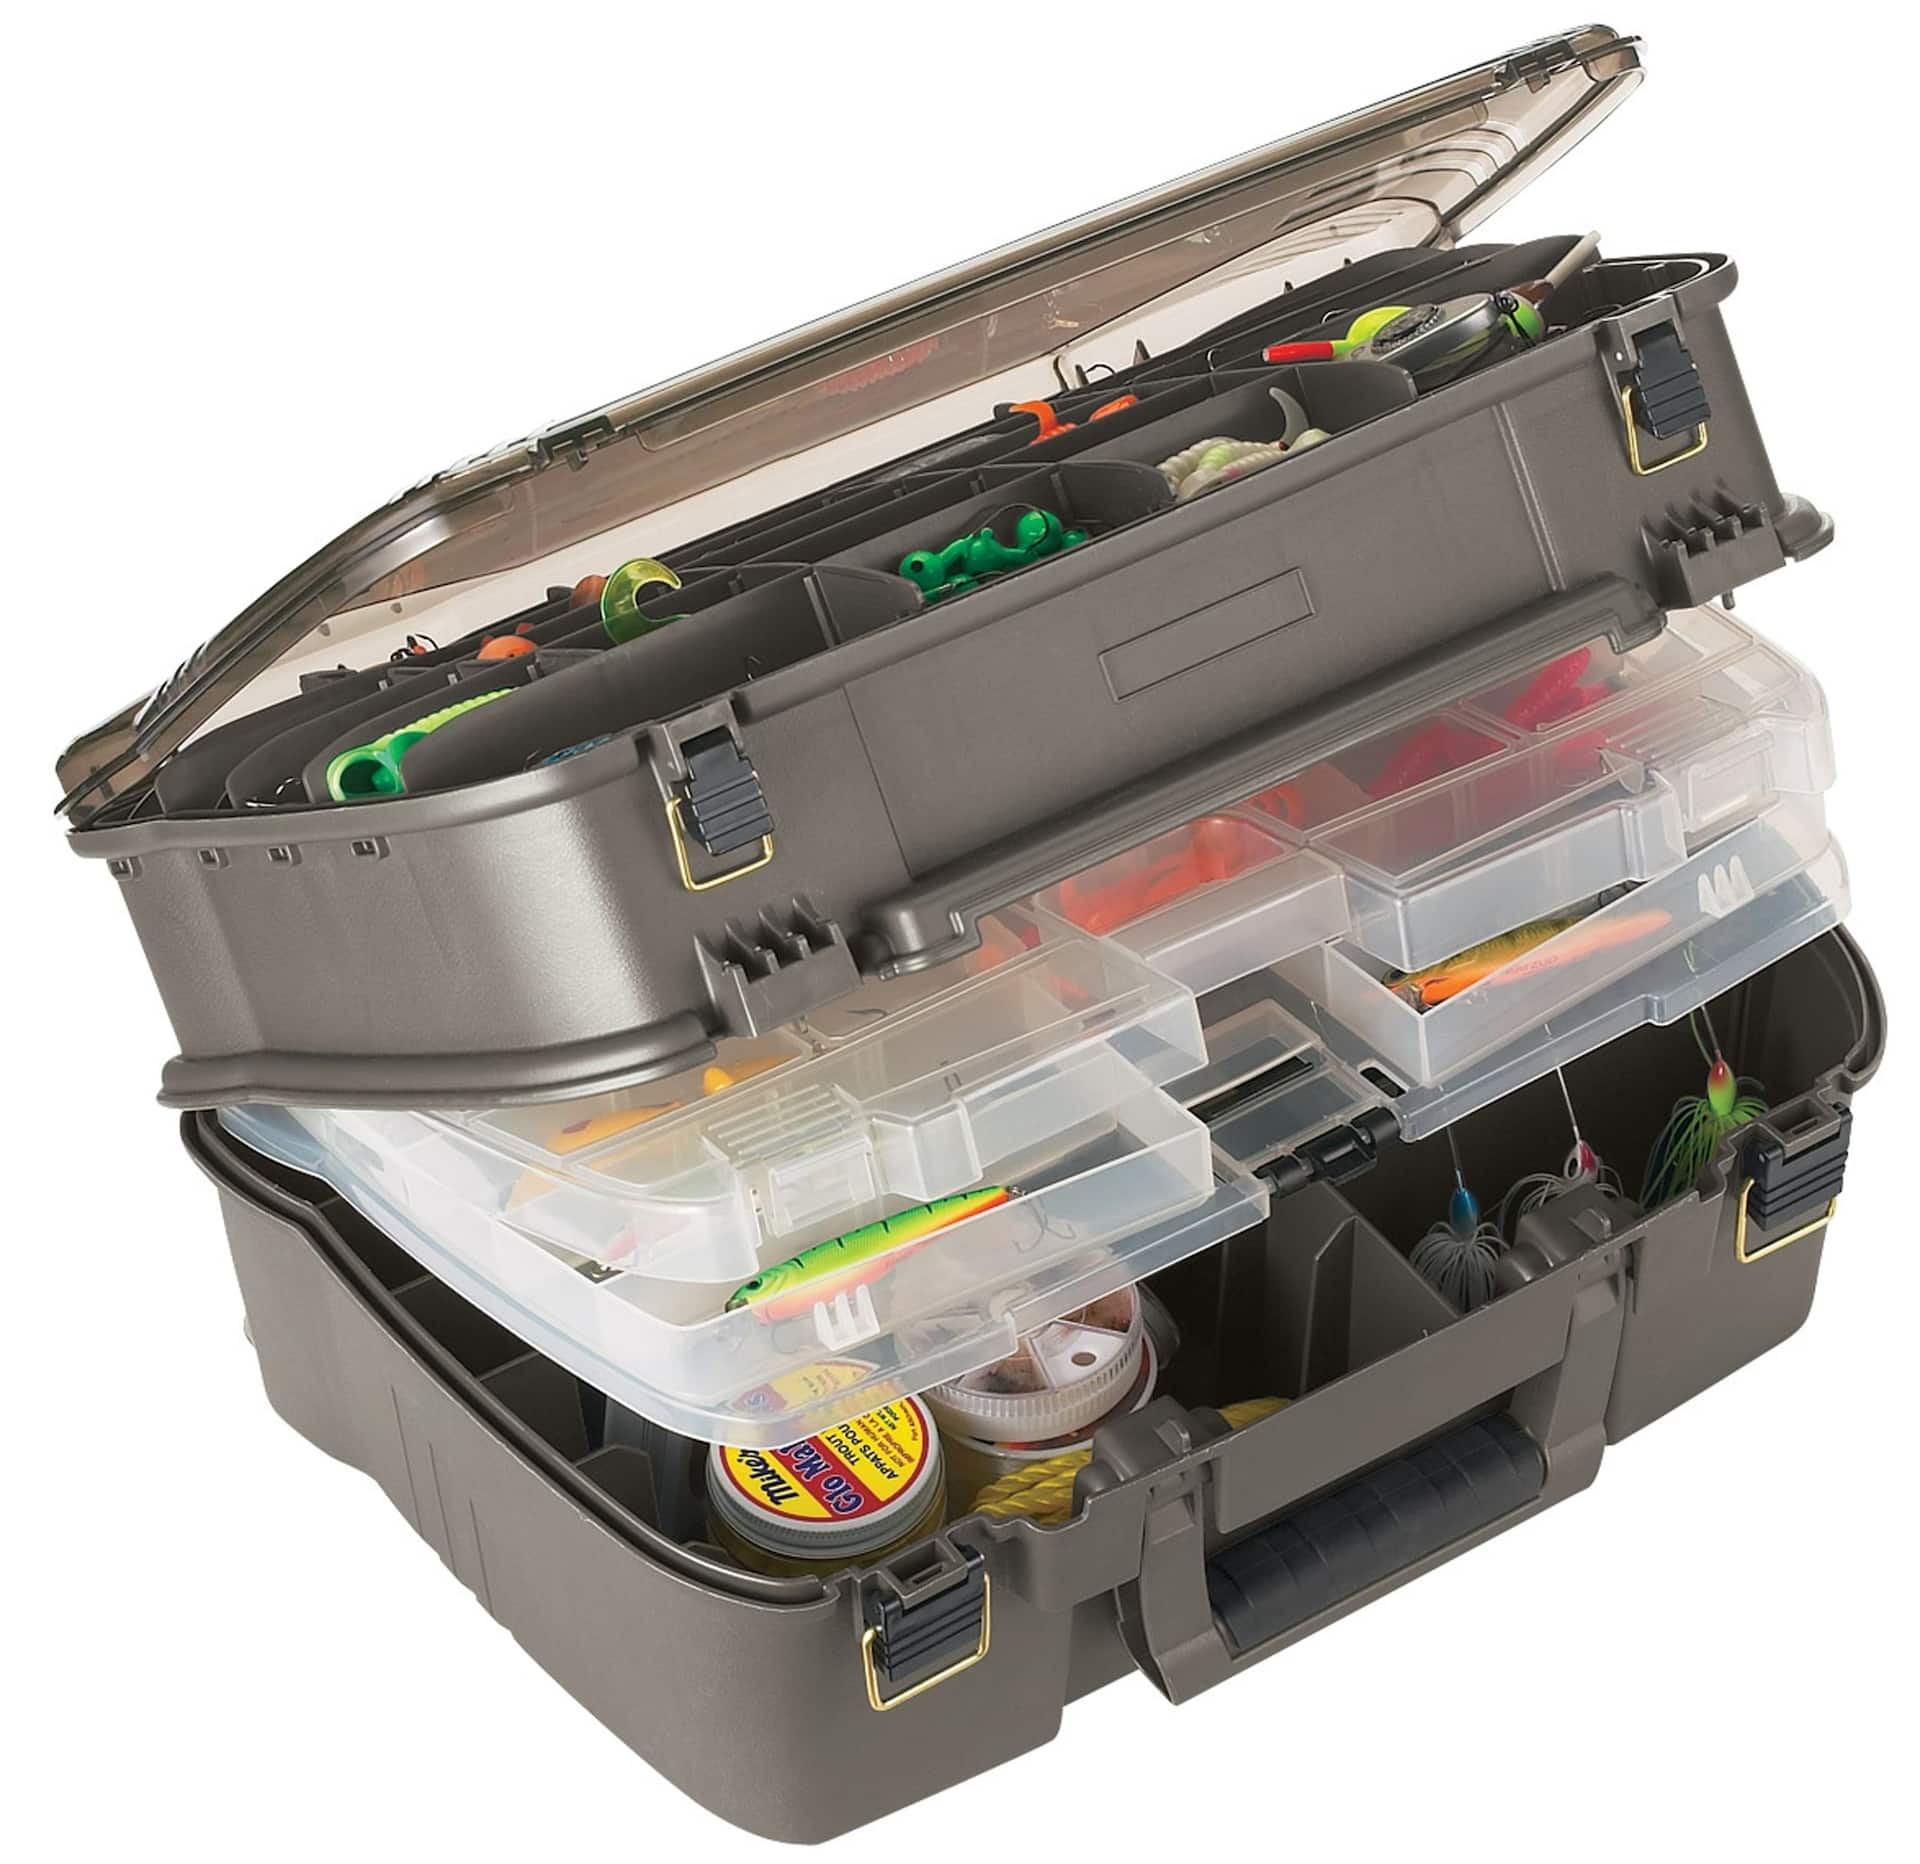  Plano 1444 Magnum Guide Series Tackle Box Graphite/Smoke, One  Size : Fishing Tackle Boxes : Sports & Outdoors